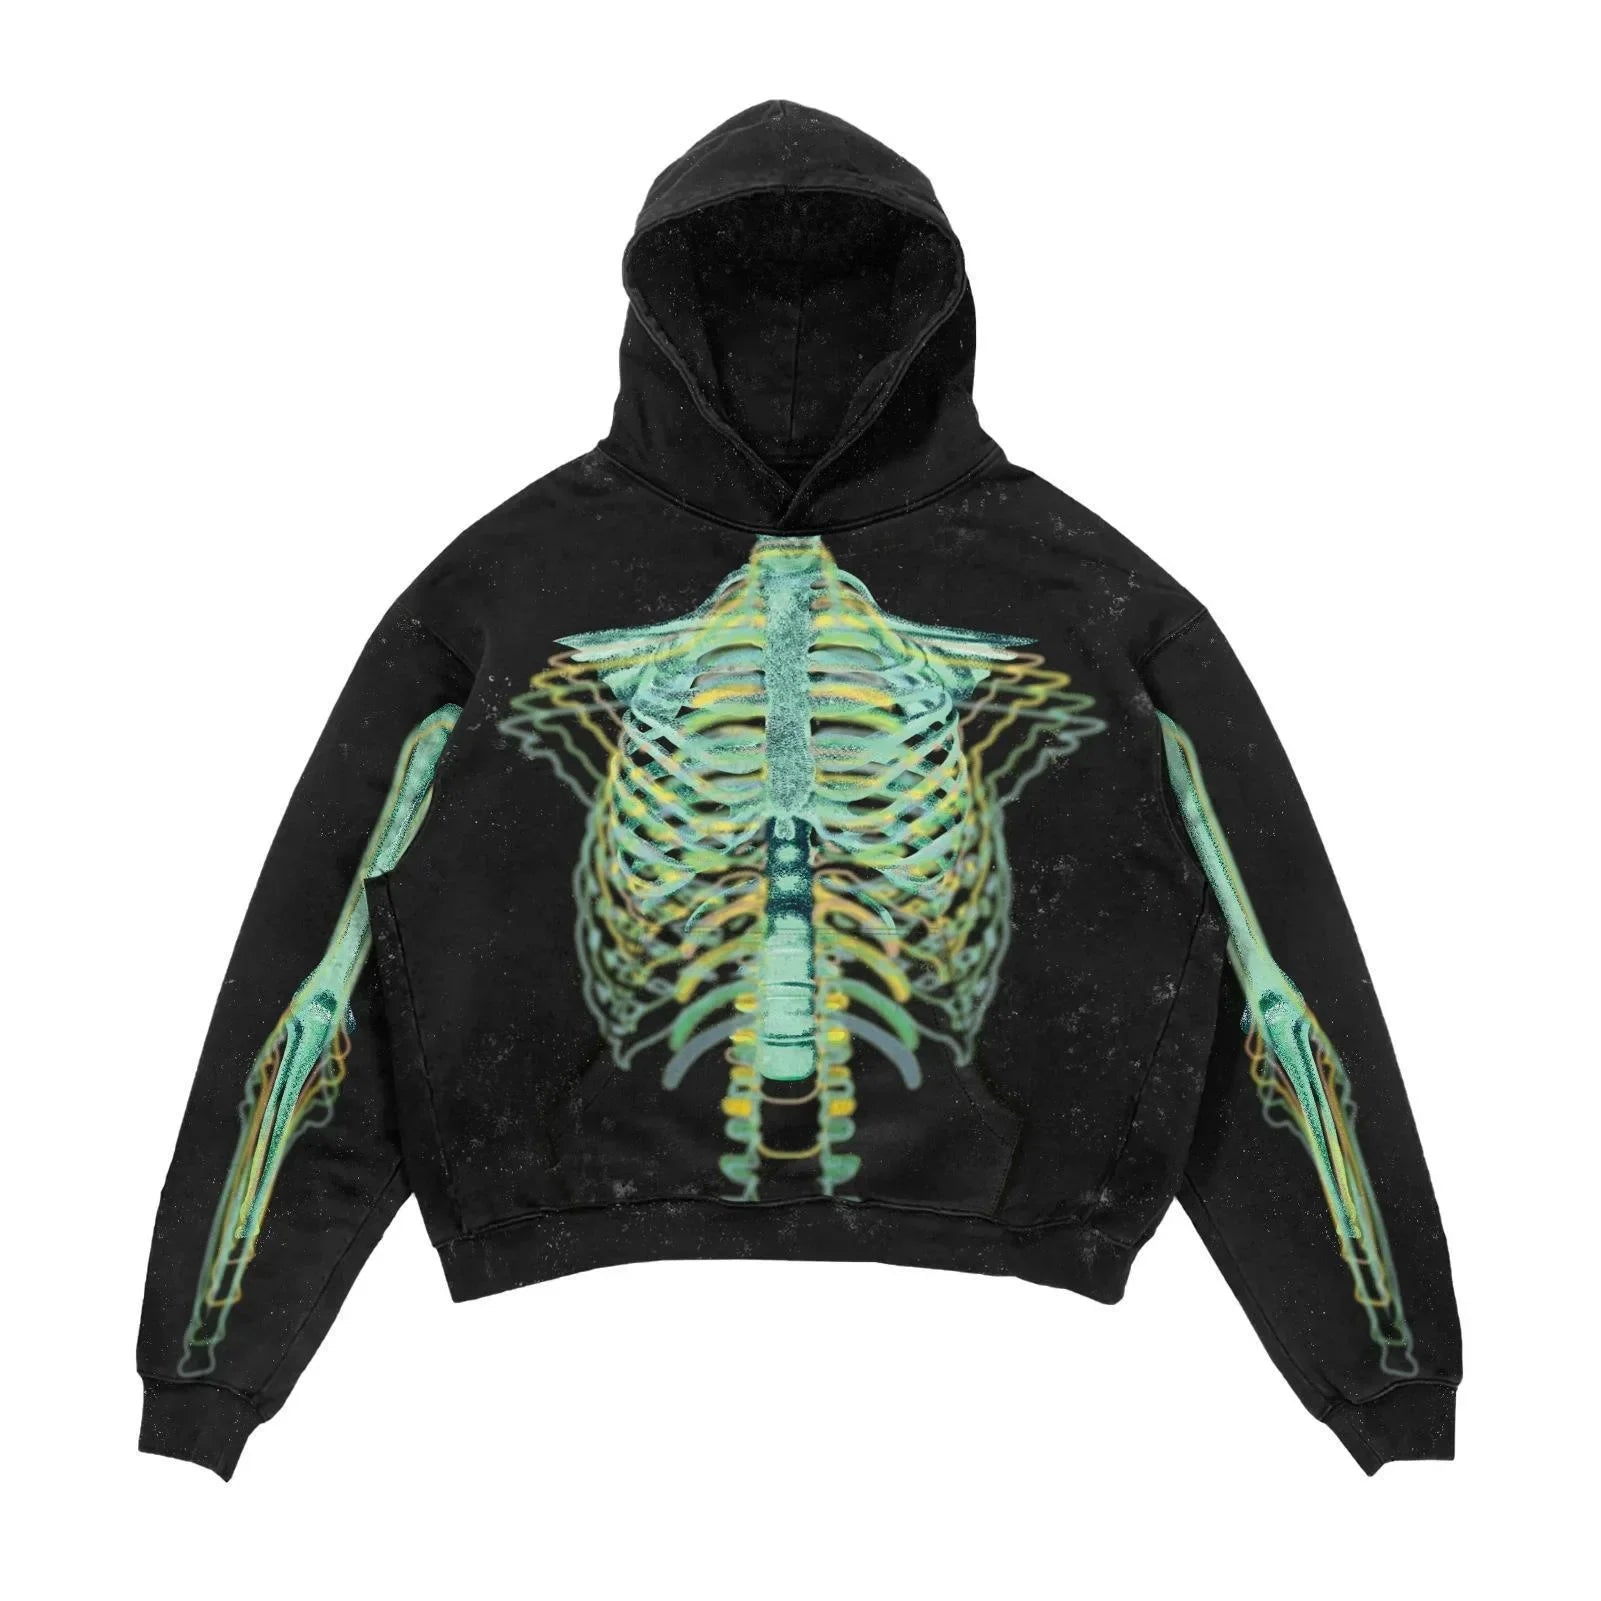 This Explosions Printed Skull Y2K Retro Hooded Sweater Coat Street Style Gothic Casual Fashion Hooded Sweater Men's Female from Maramalive™ embodies punk style, featuring a detailed graphic of a human ribcage and arm bones in green and yellow hues on the front. A standout piece in men's fashion, perfect for those looking to make a bold statement.